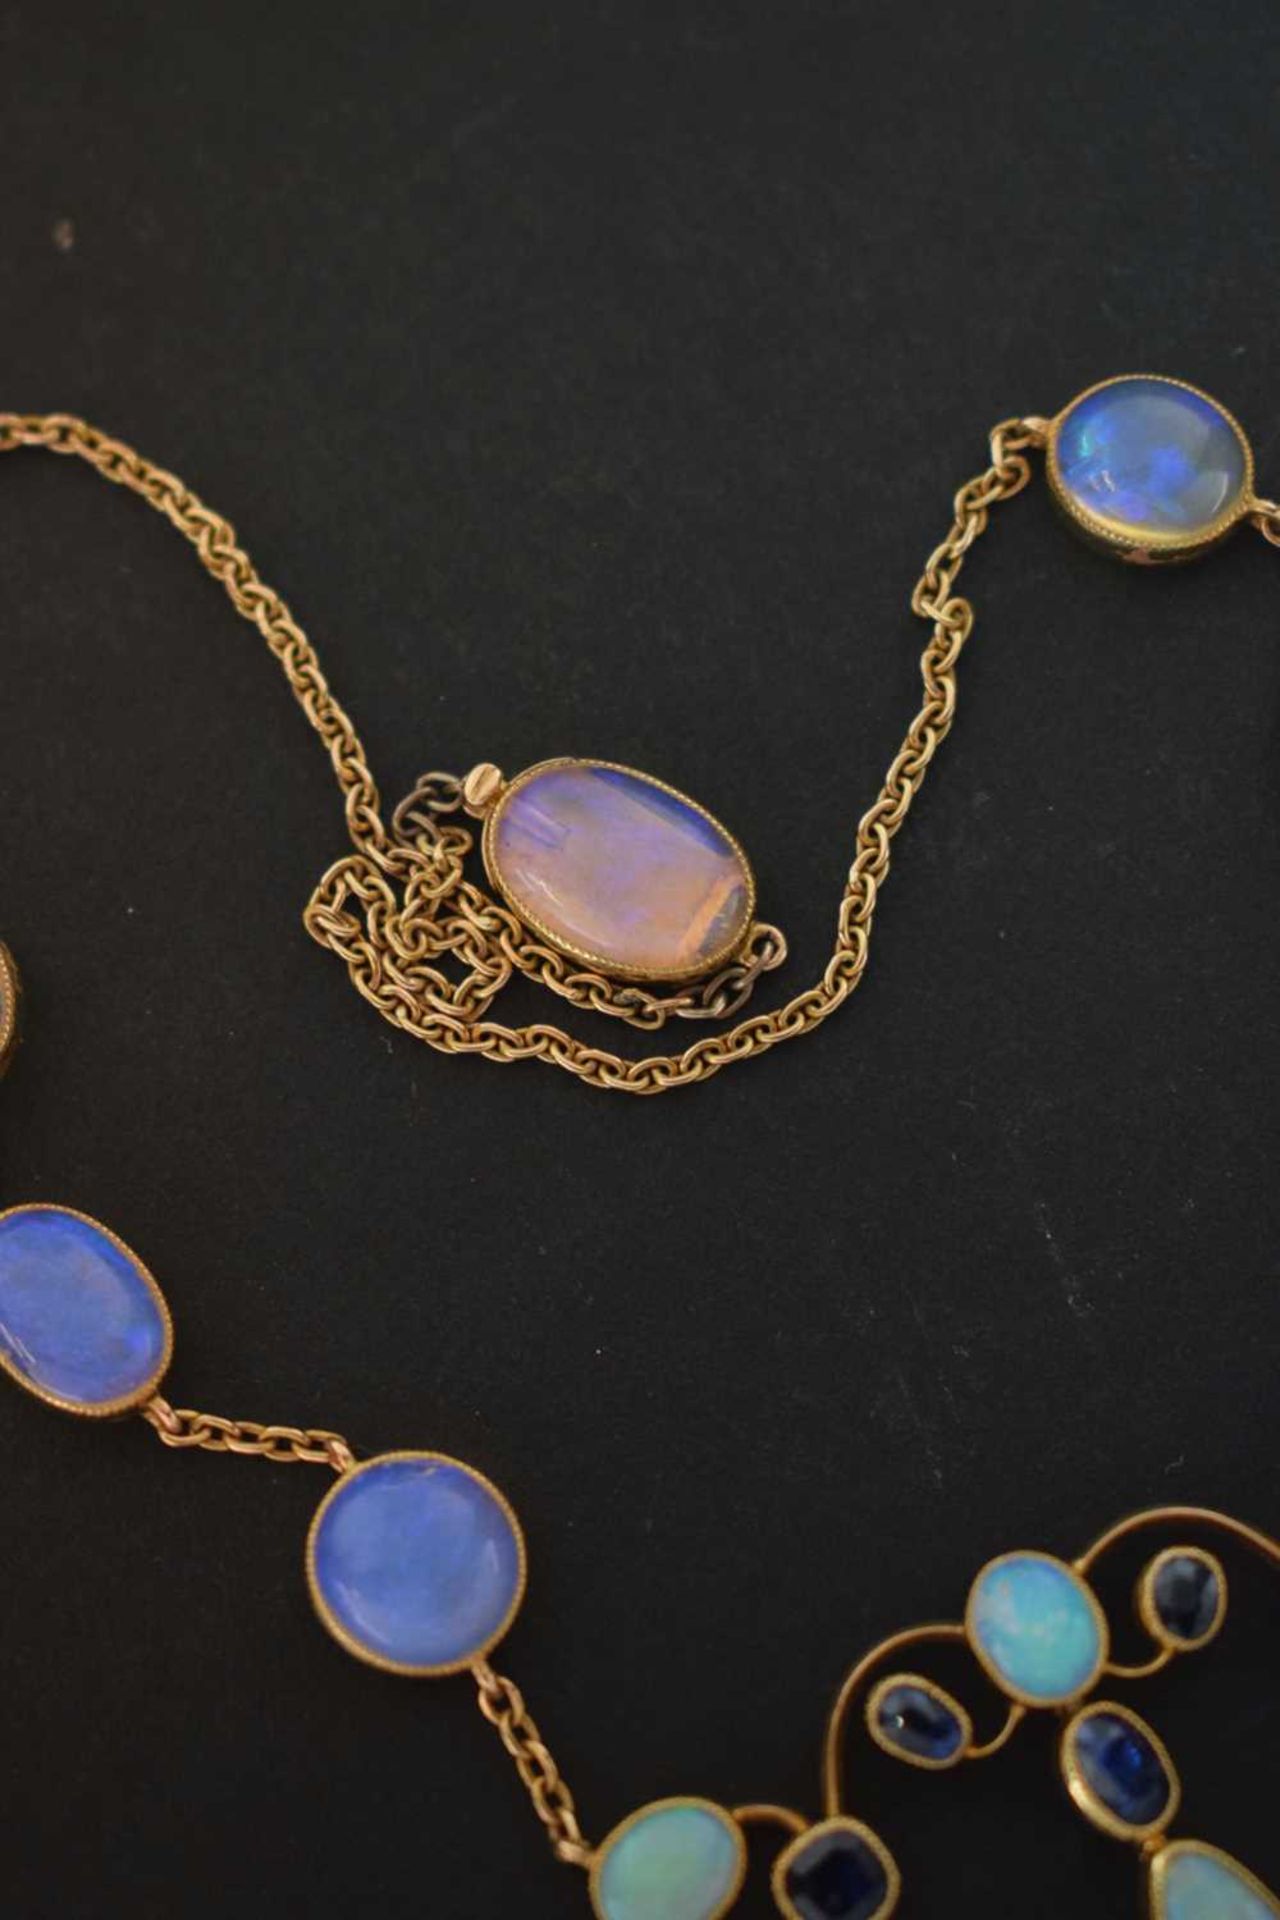 Opal and sapphire pendant necklace in the Arts and Crafts manner - Image 5 of 12